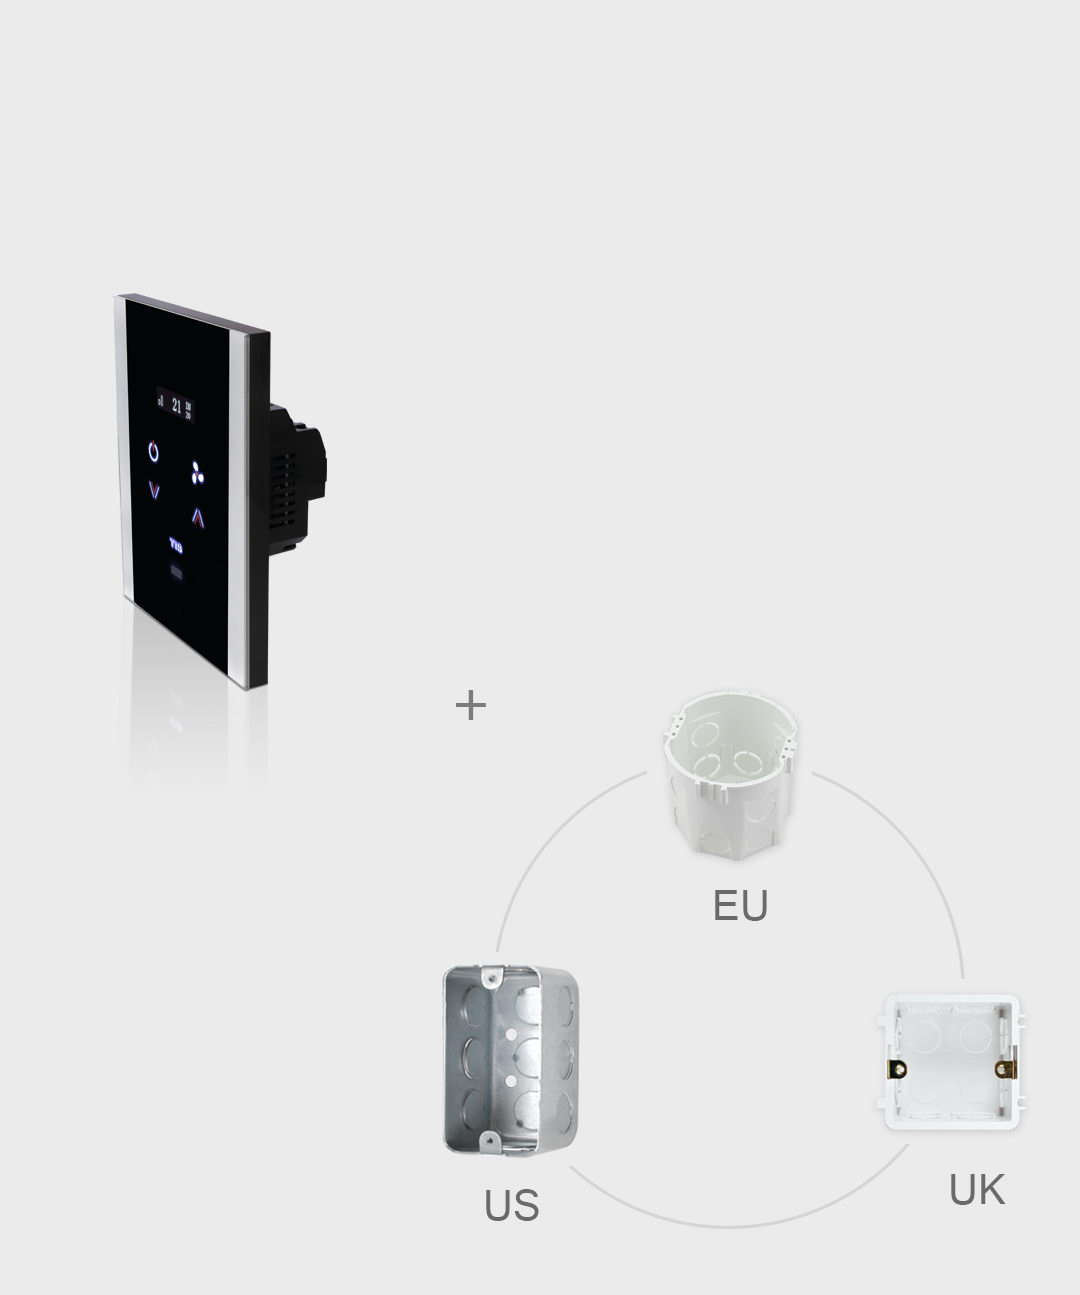 Compatible with US , UK and EU sizes -TIS wall Dimmer